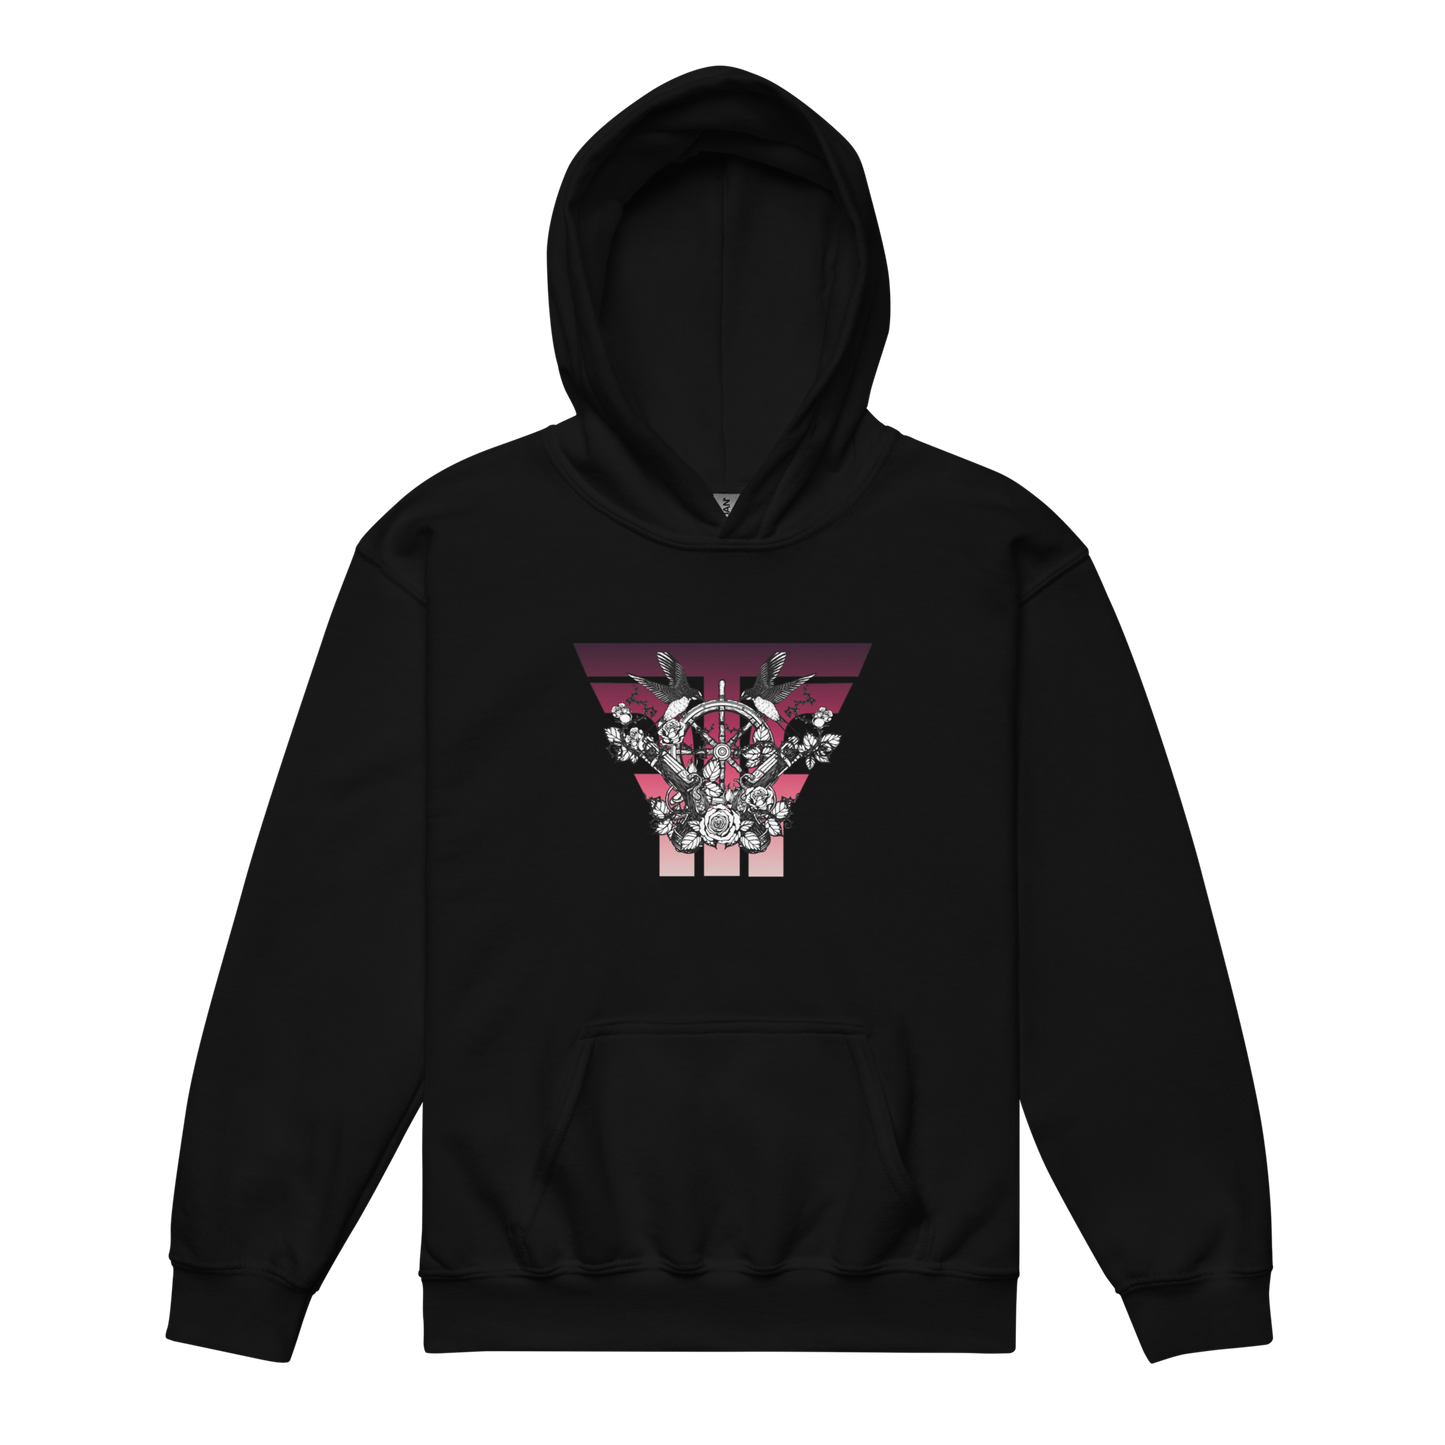 FTF COMPASS - YOUTH  heavy blend hoodie